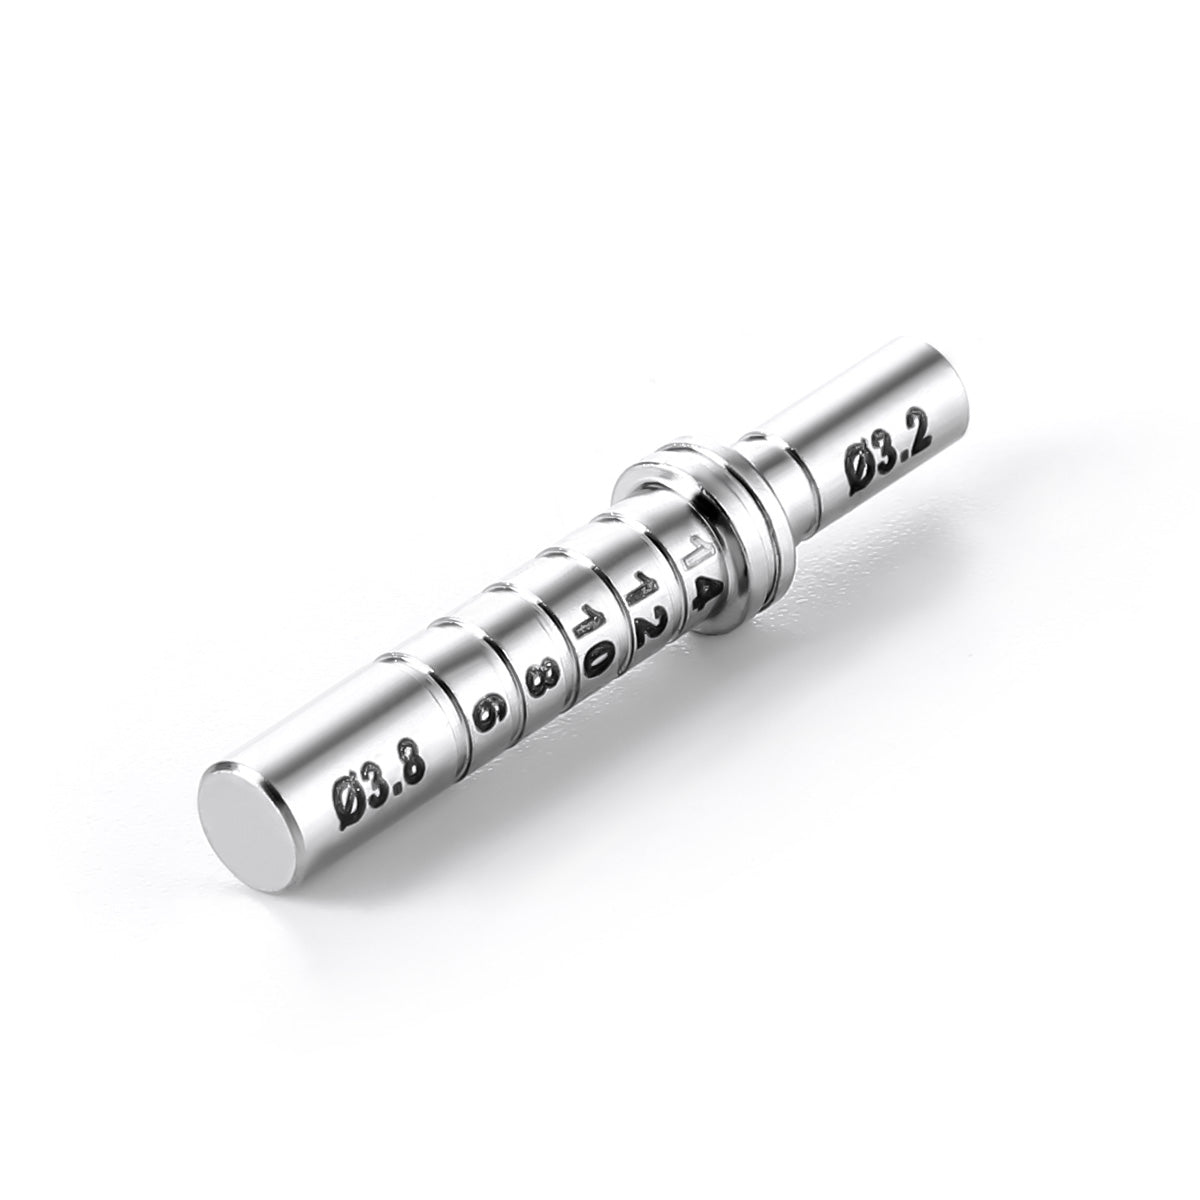 Dental Implant Depth Gauge Pin Stainless Steel Double Head 3.2/3.8mm 1pc/Pack - azdentall.com